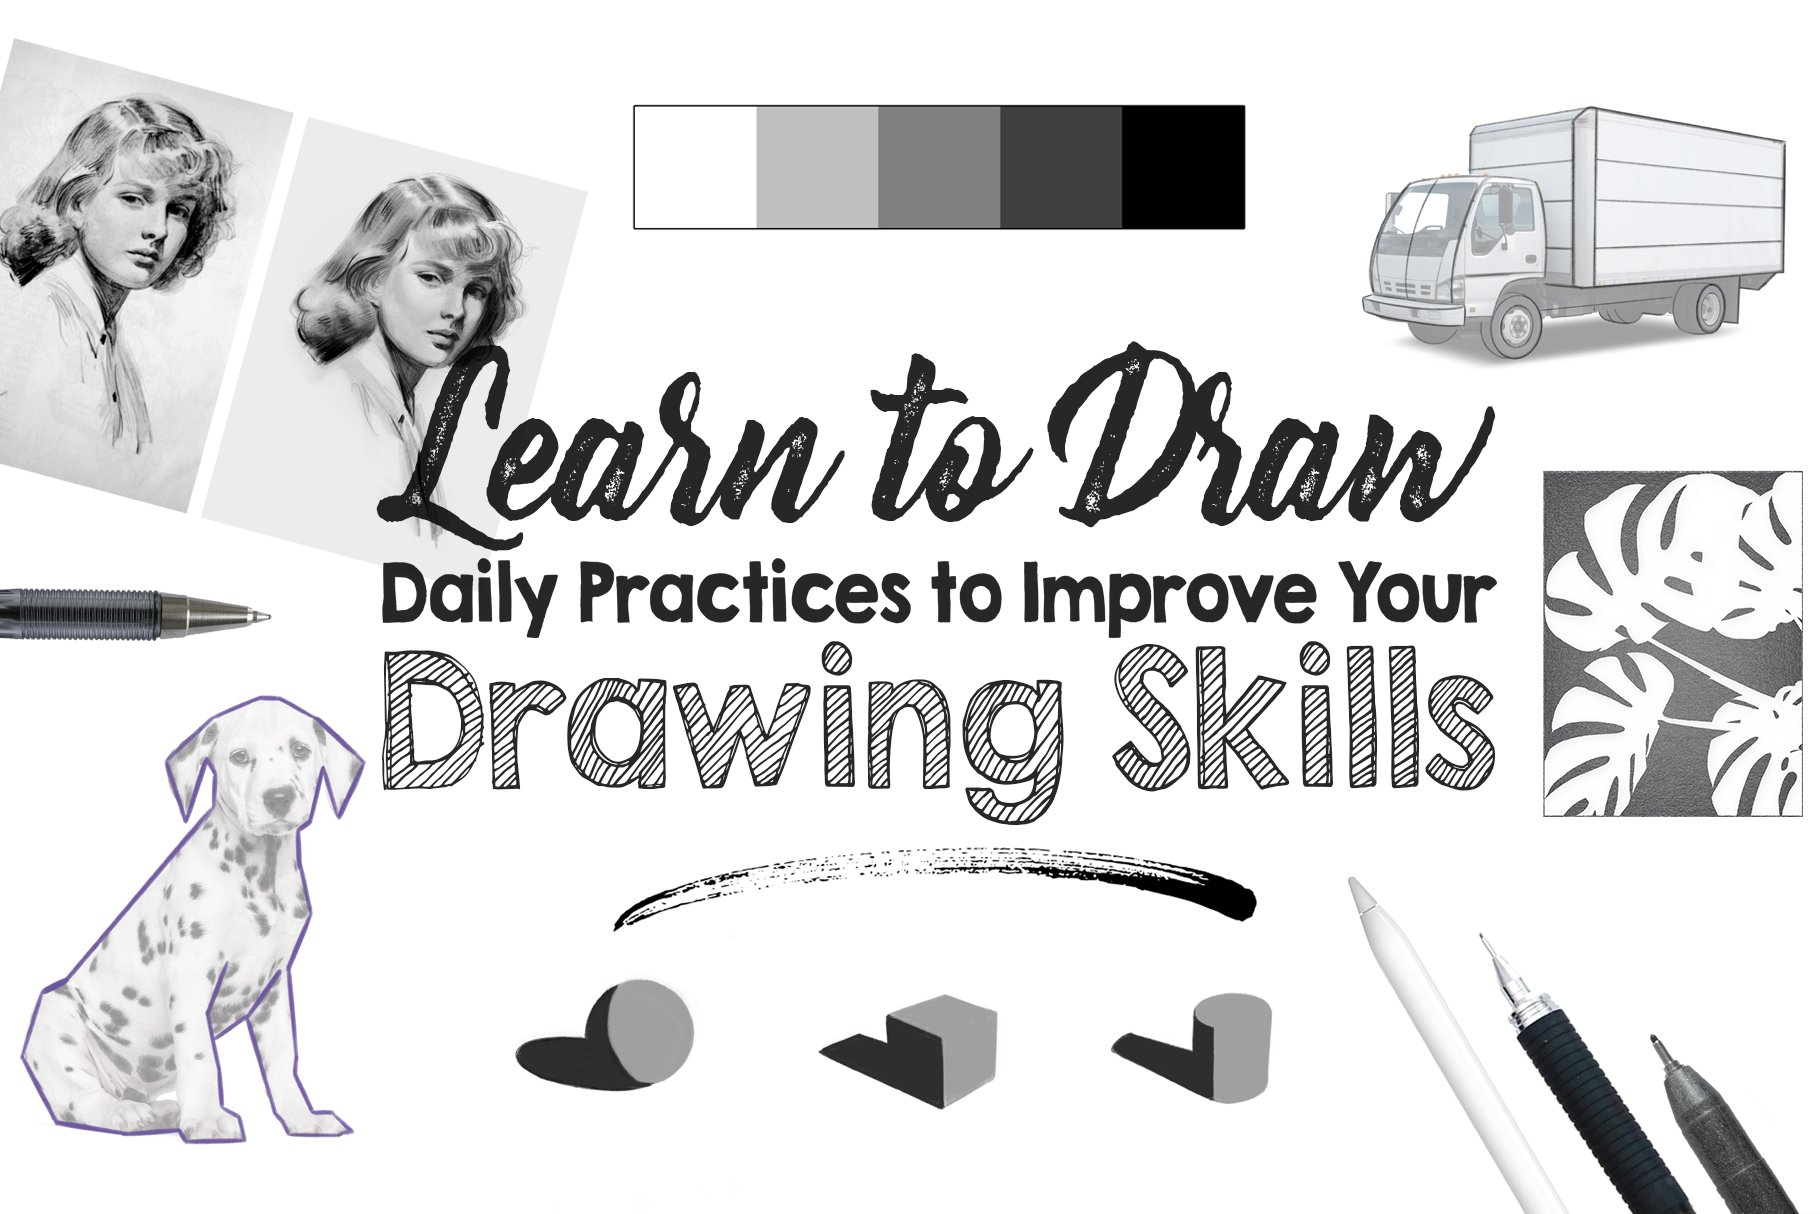 Is it possible to learn drawing if you have no inherent talent in it  whatsoever? - Quora